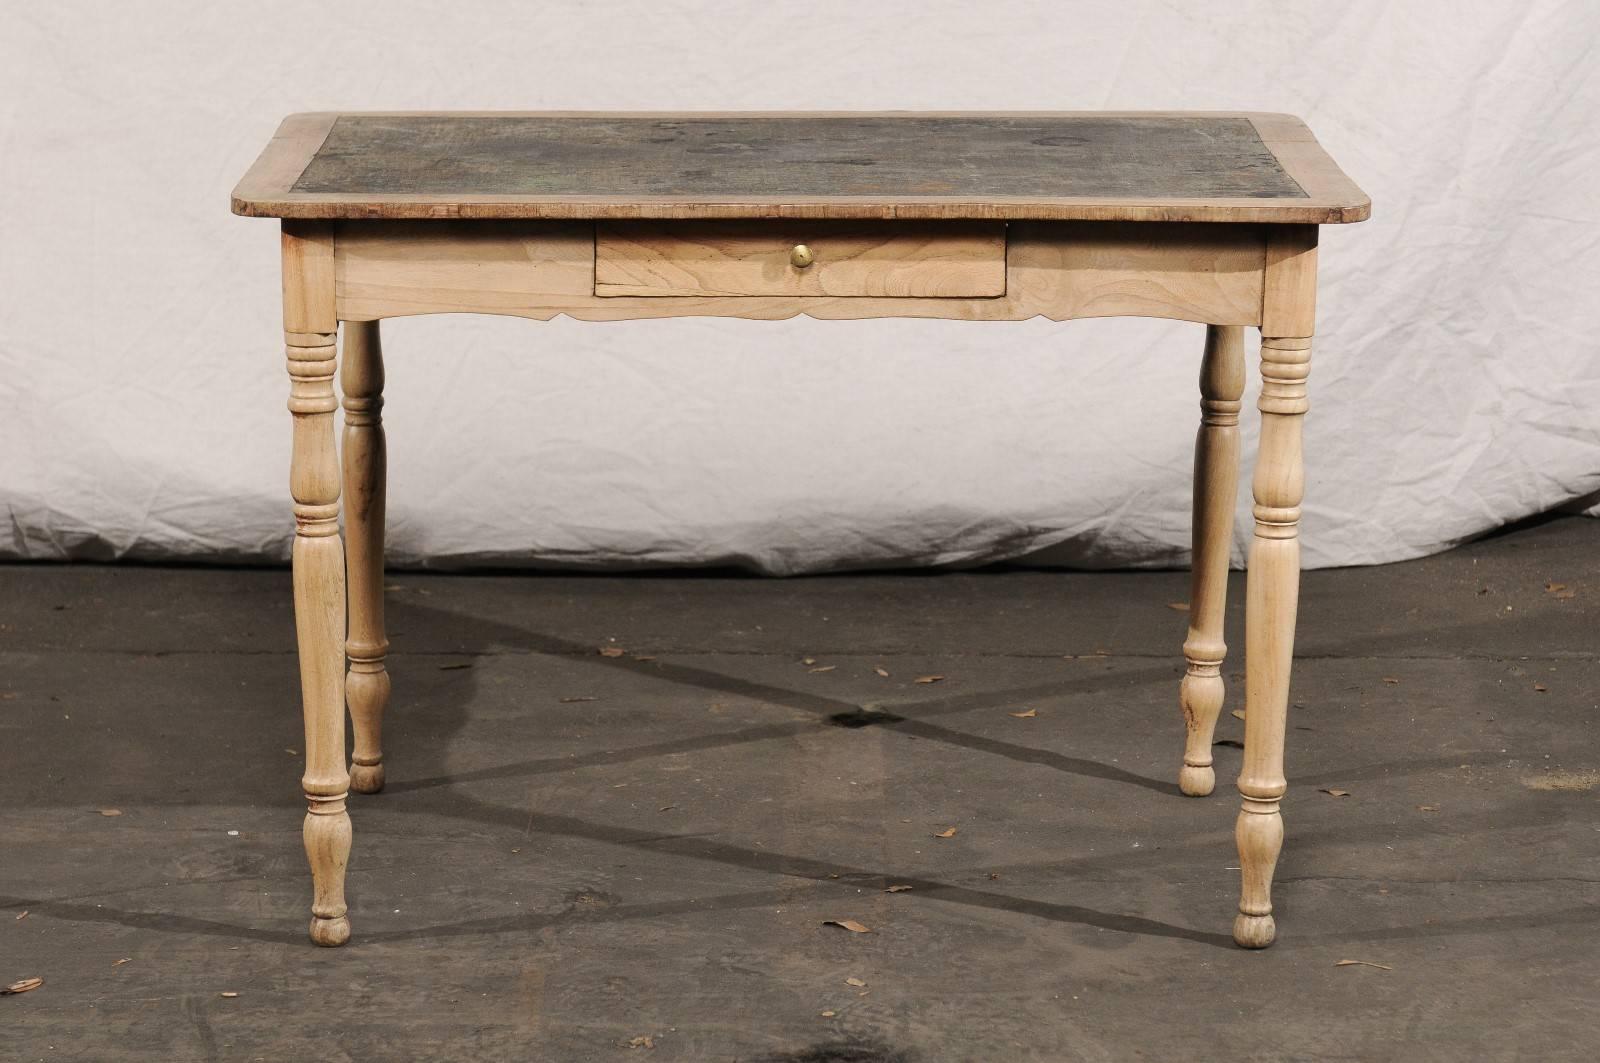 19th century English bleached pine writing table with leather top, one drawer.